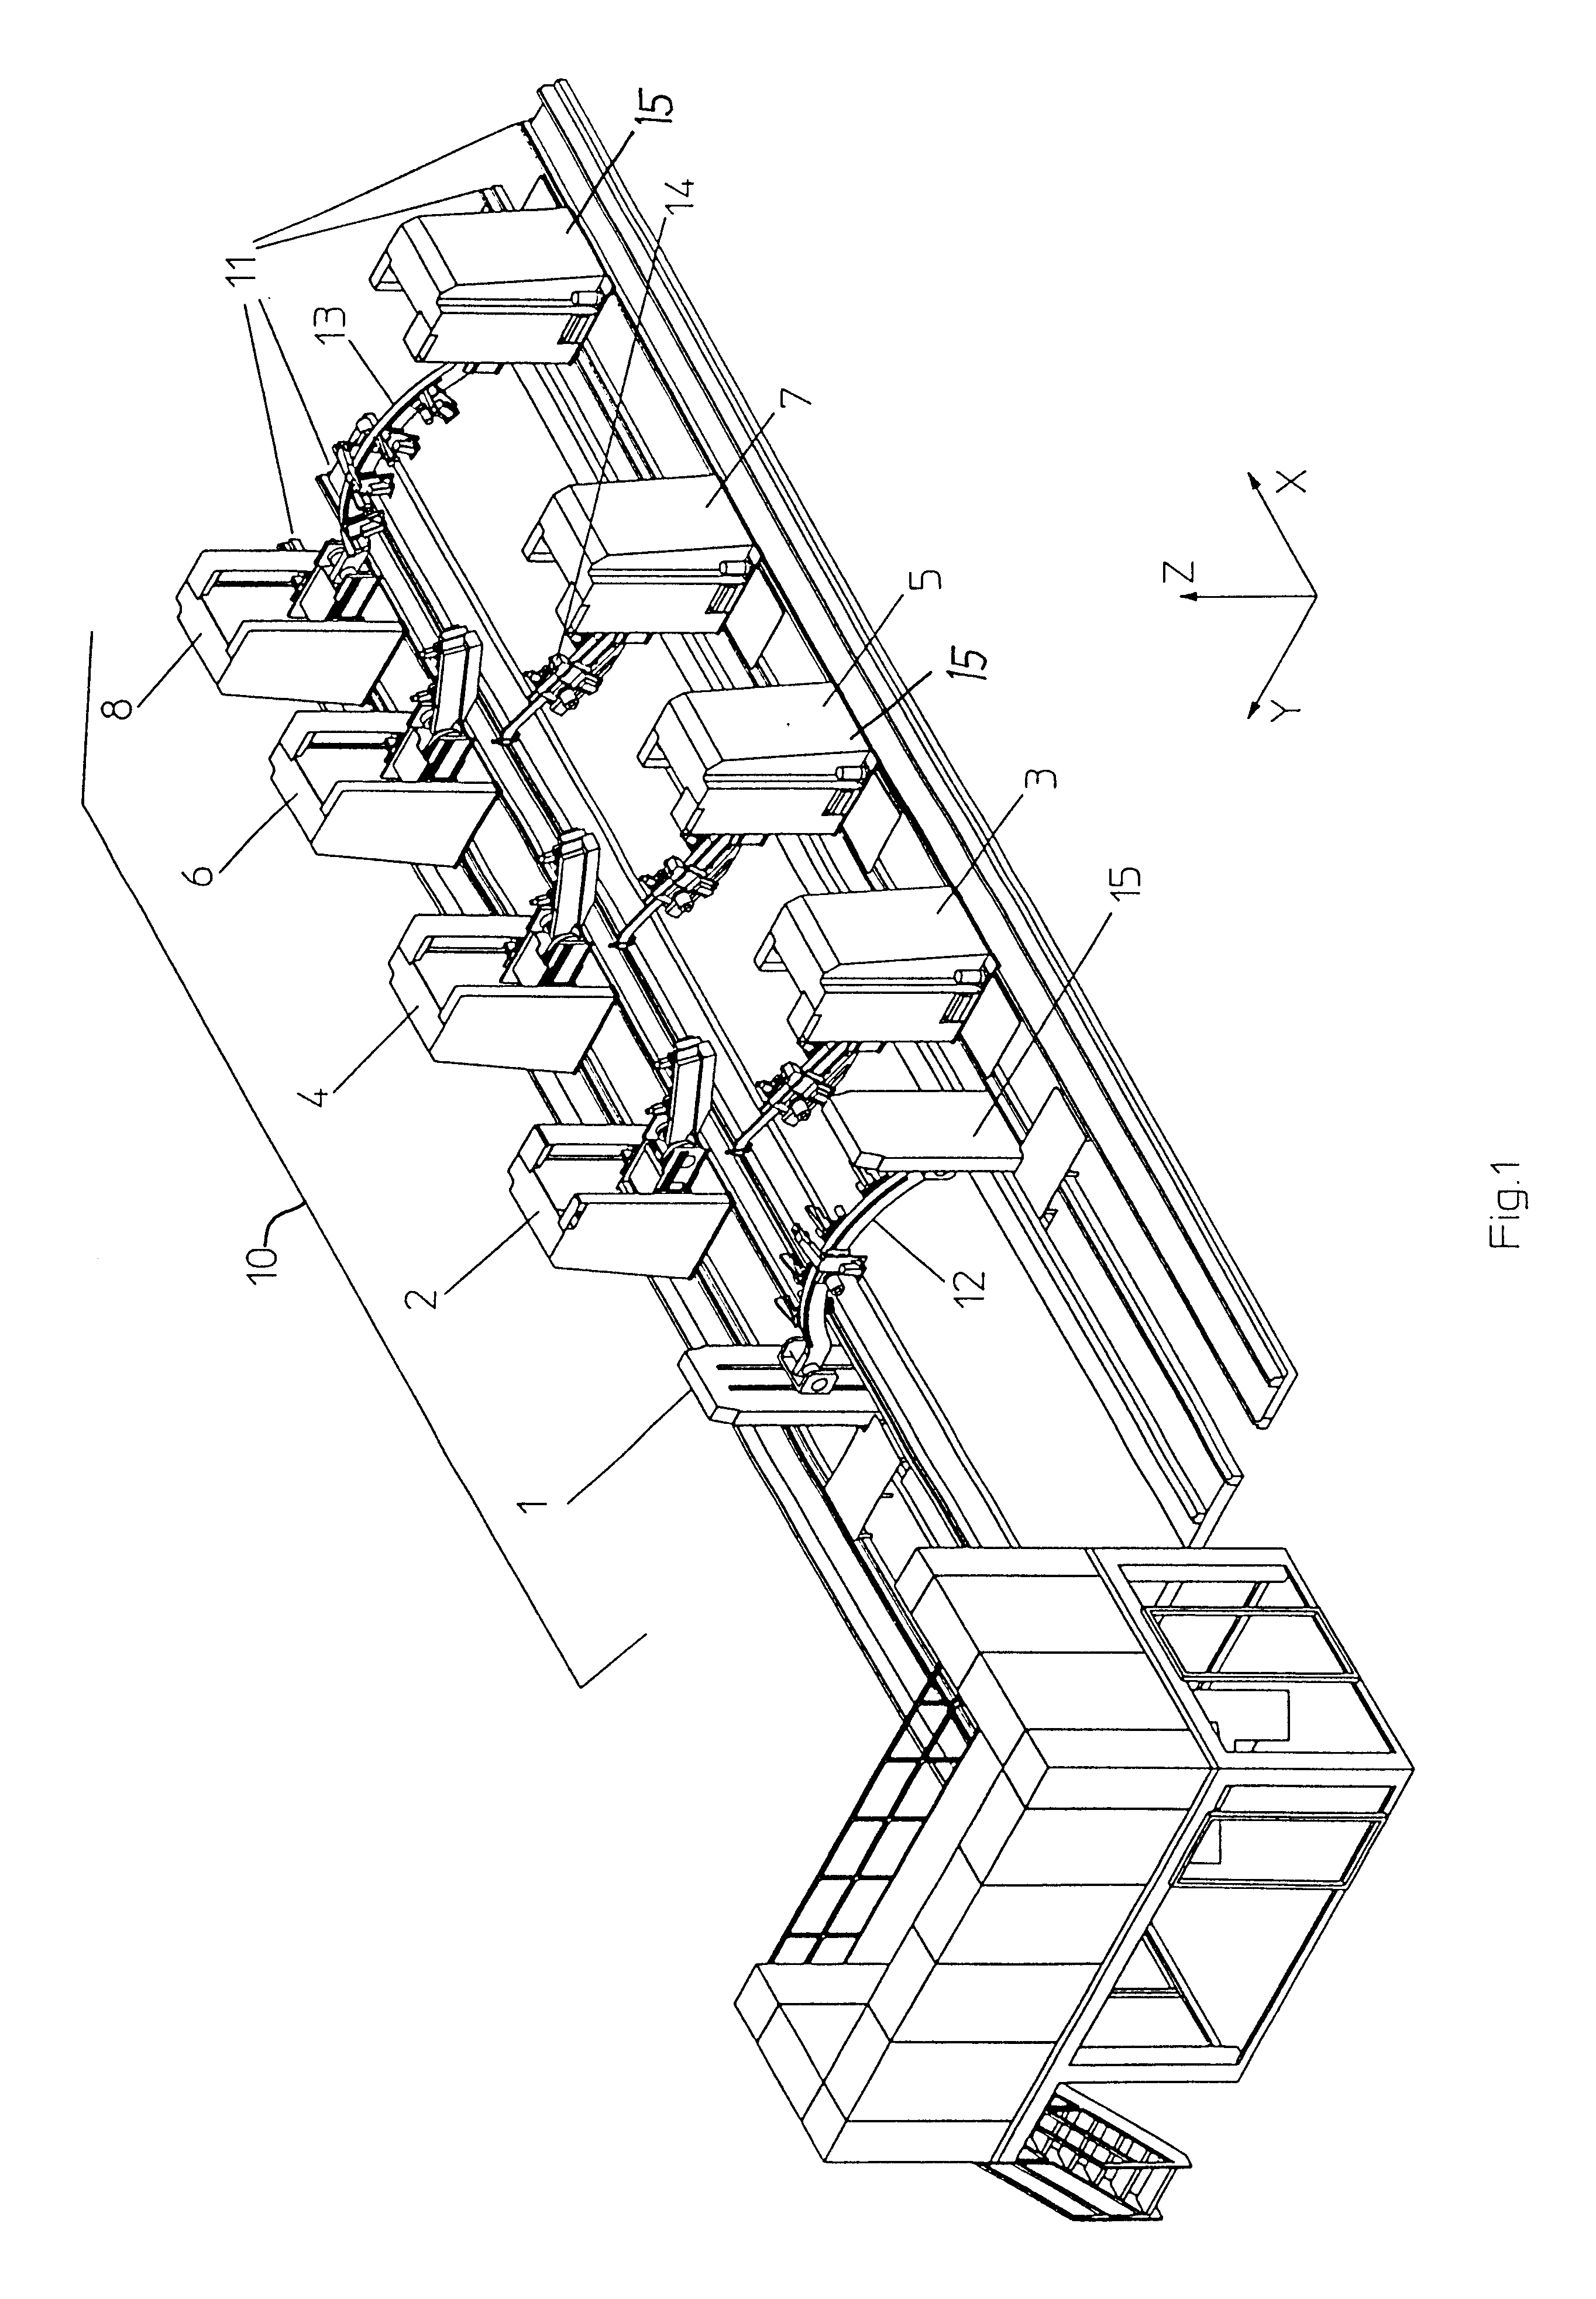 Versatile adaptable holding apparatus for holding large format workpieces and method